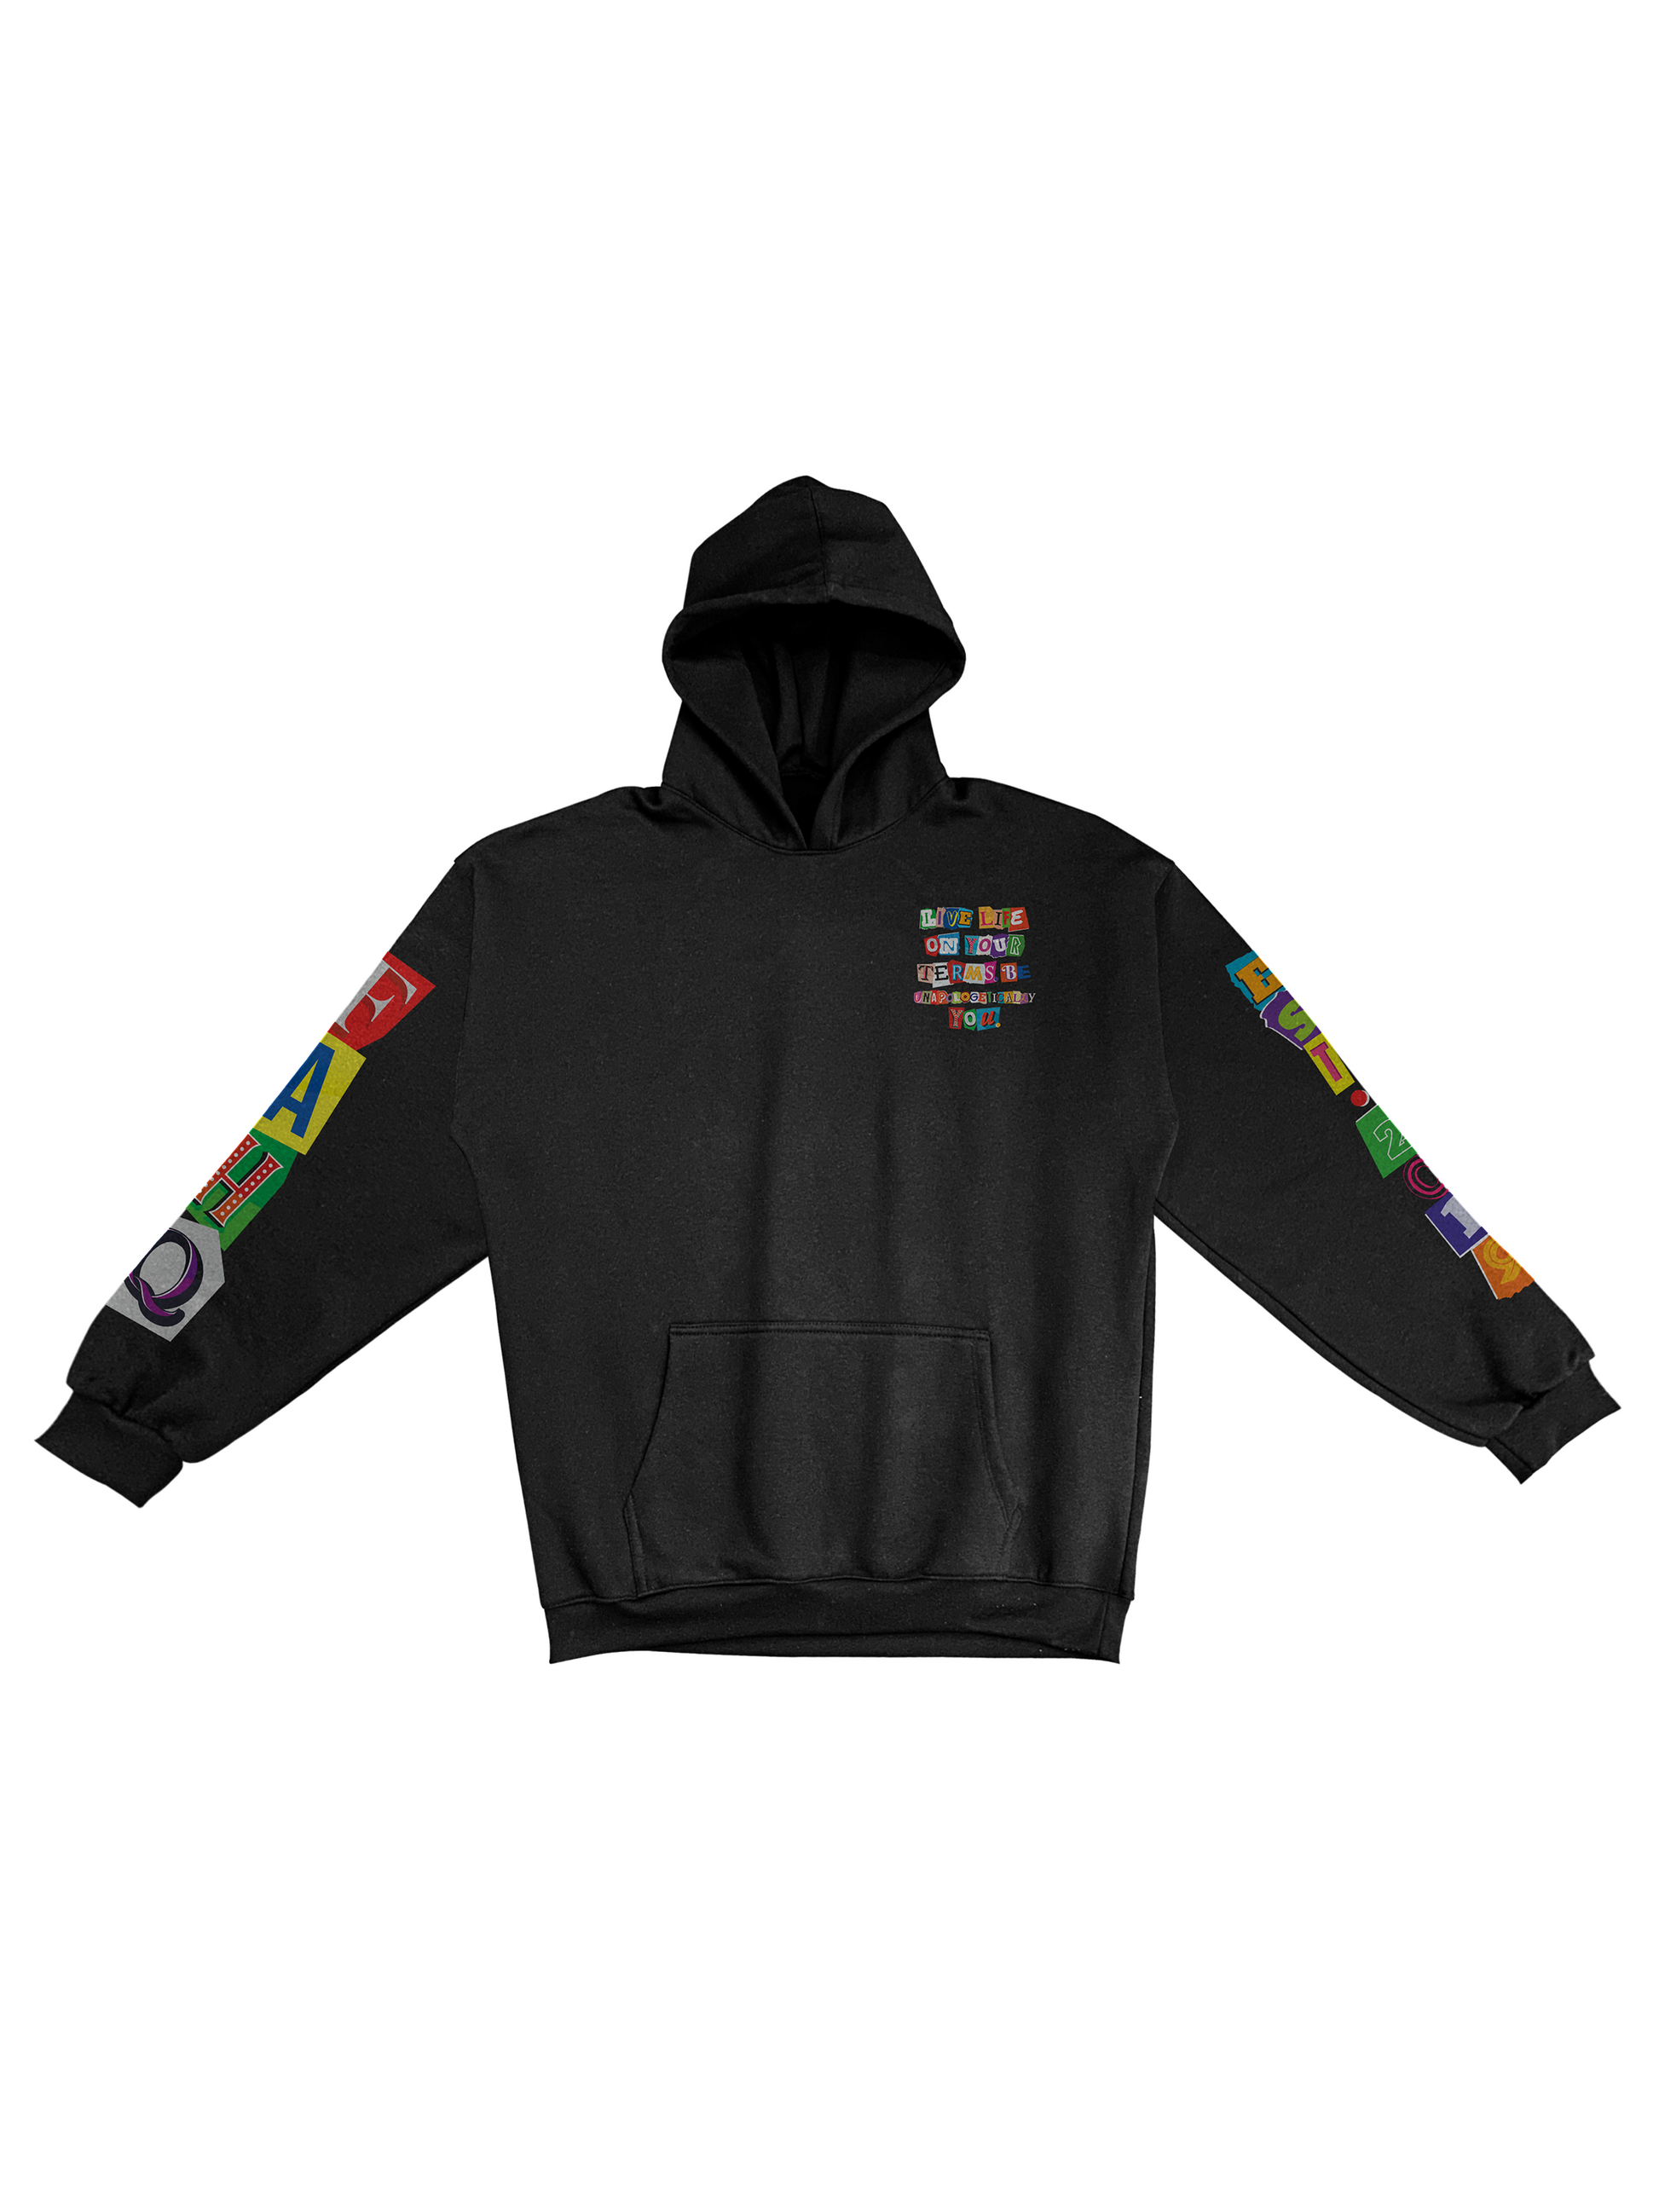 FAHQ Slogan Hoodie Front